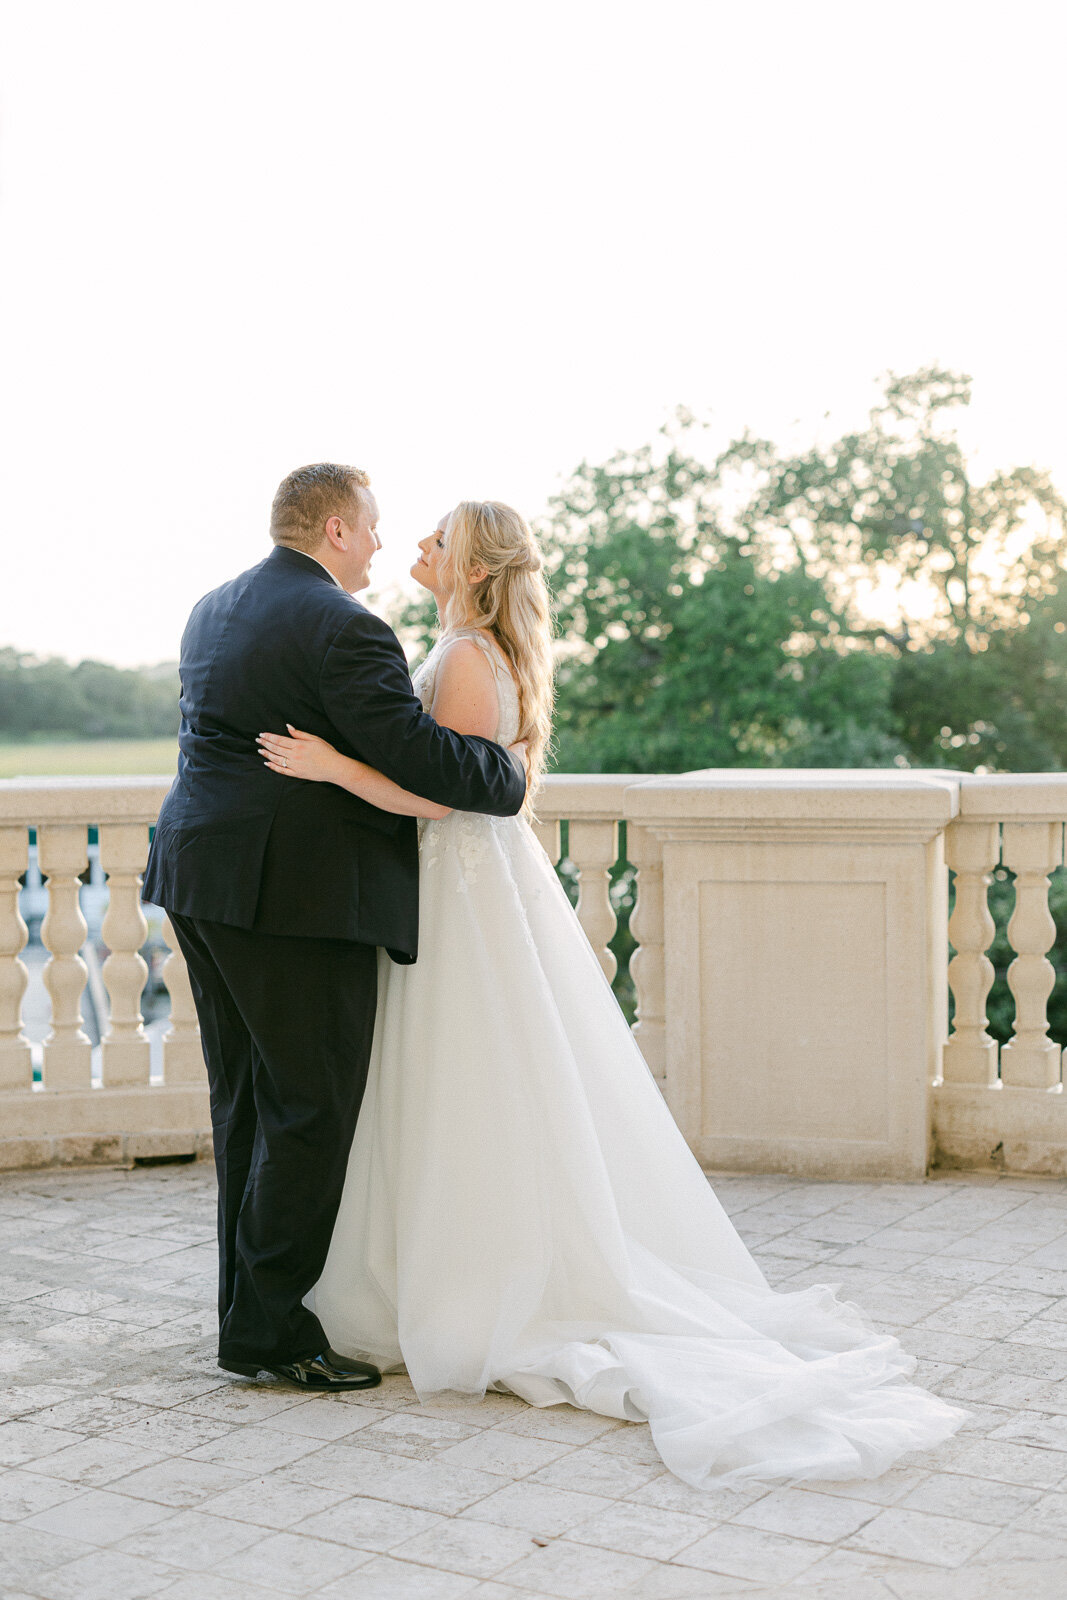 sea island wedding photography - intimate elopement - Darian Reilly Photography-57